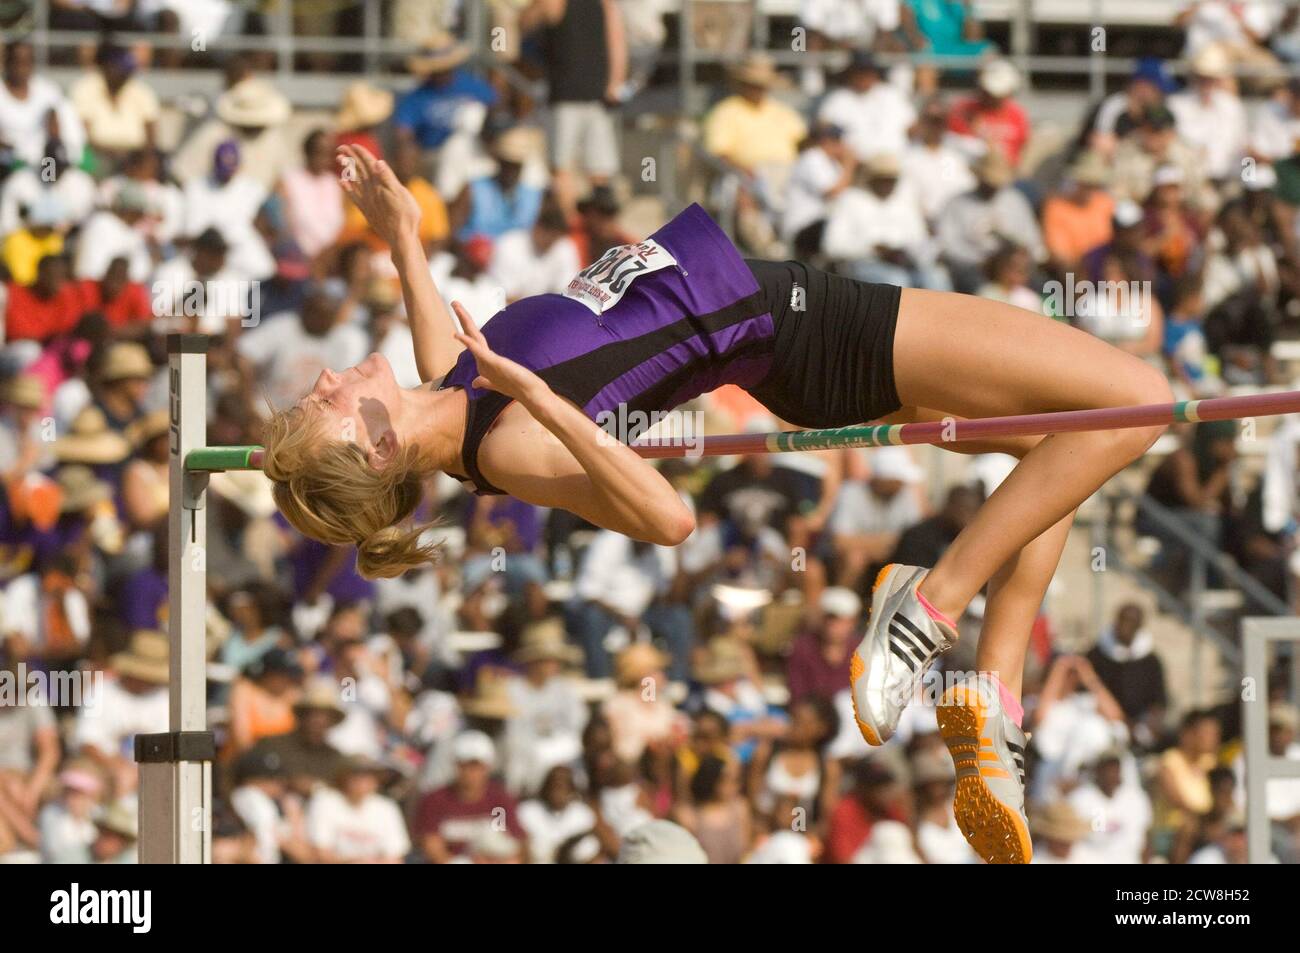 Austin, TX May 10, 2008: Anglo girl goes over high-jump bar at the Texas high school track and field state championship meet at the University of Texas at Austin.      ©Bob Daemmrich/ Stock Photo